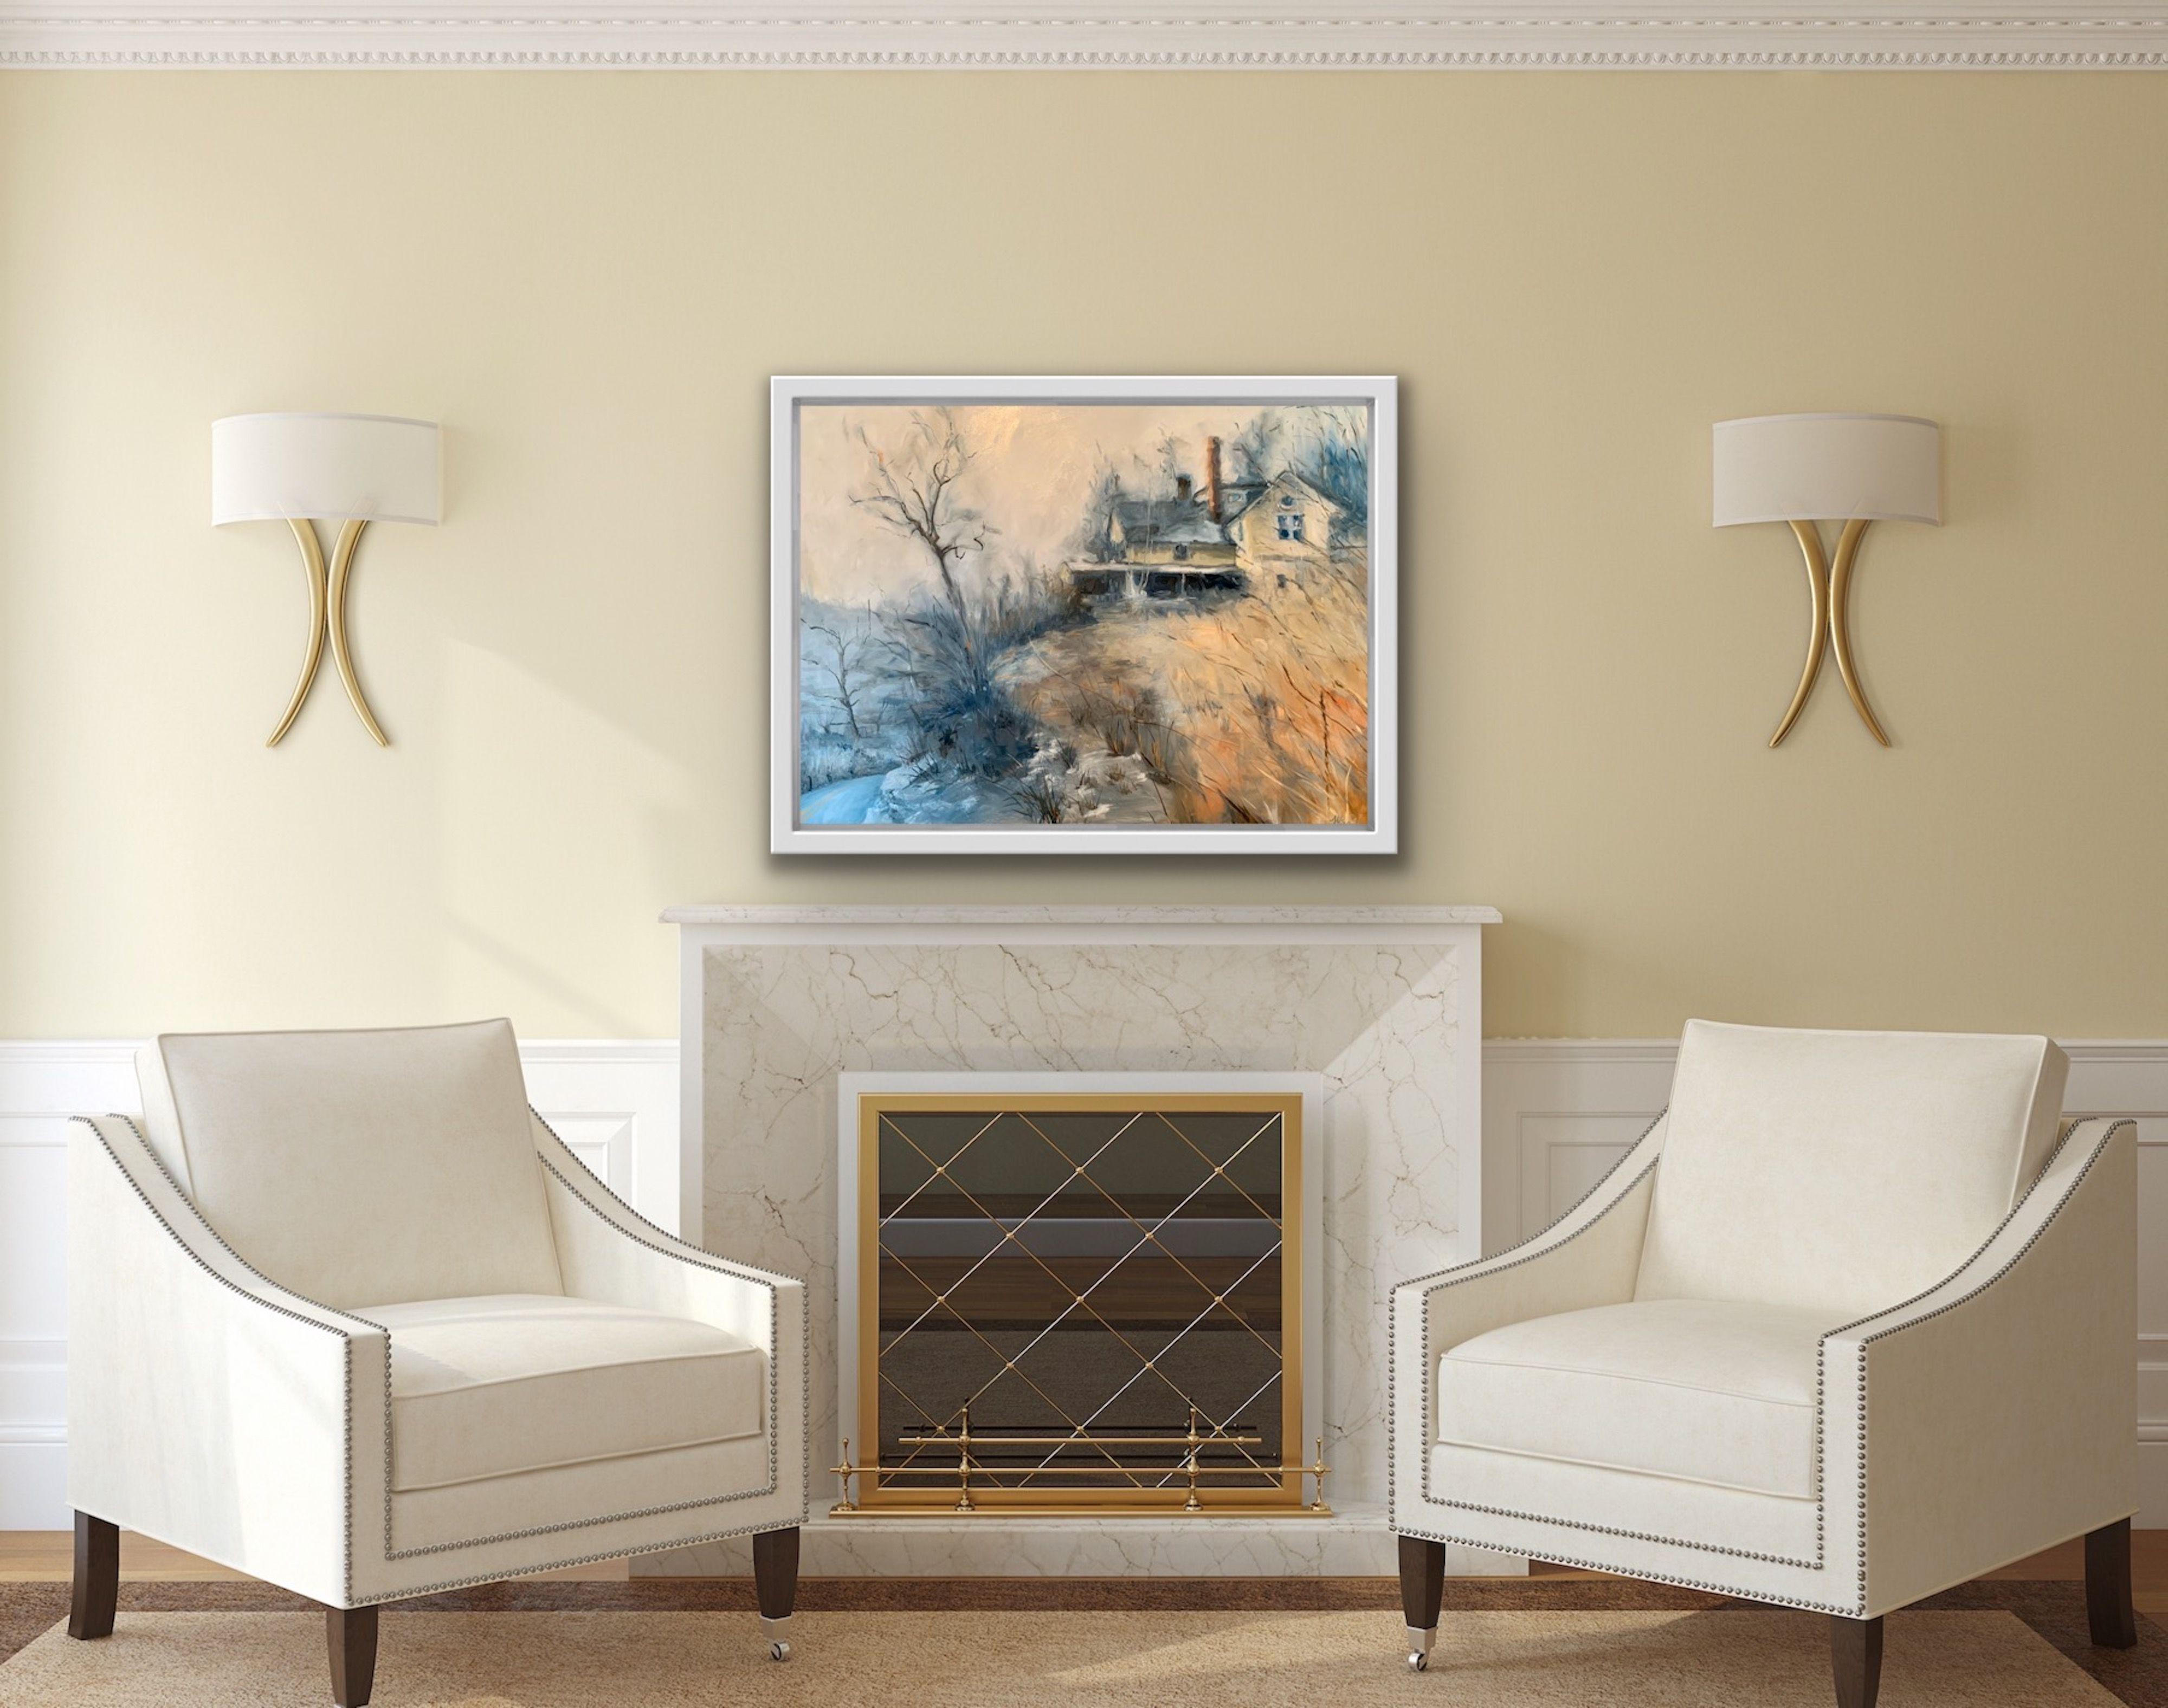 A yellow country home is perched on the edge of a cliff. The Cliff is has a wintery mix of snow and ocher grass with bare trees reaching into a blustery sky. This painting ships as a rolled canvas ready to assemble, unless otherwise specified.  ::